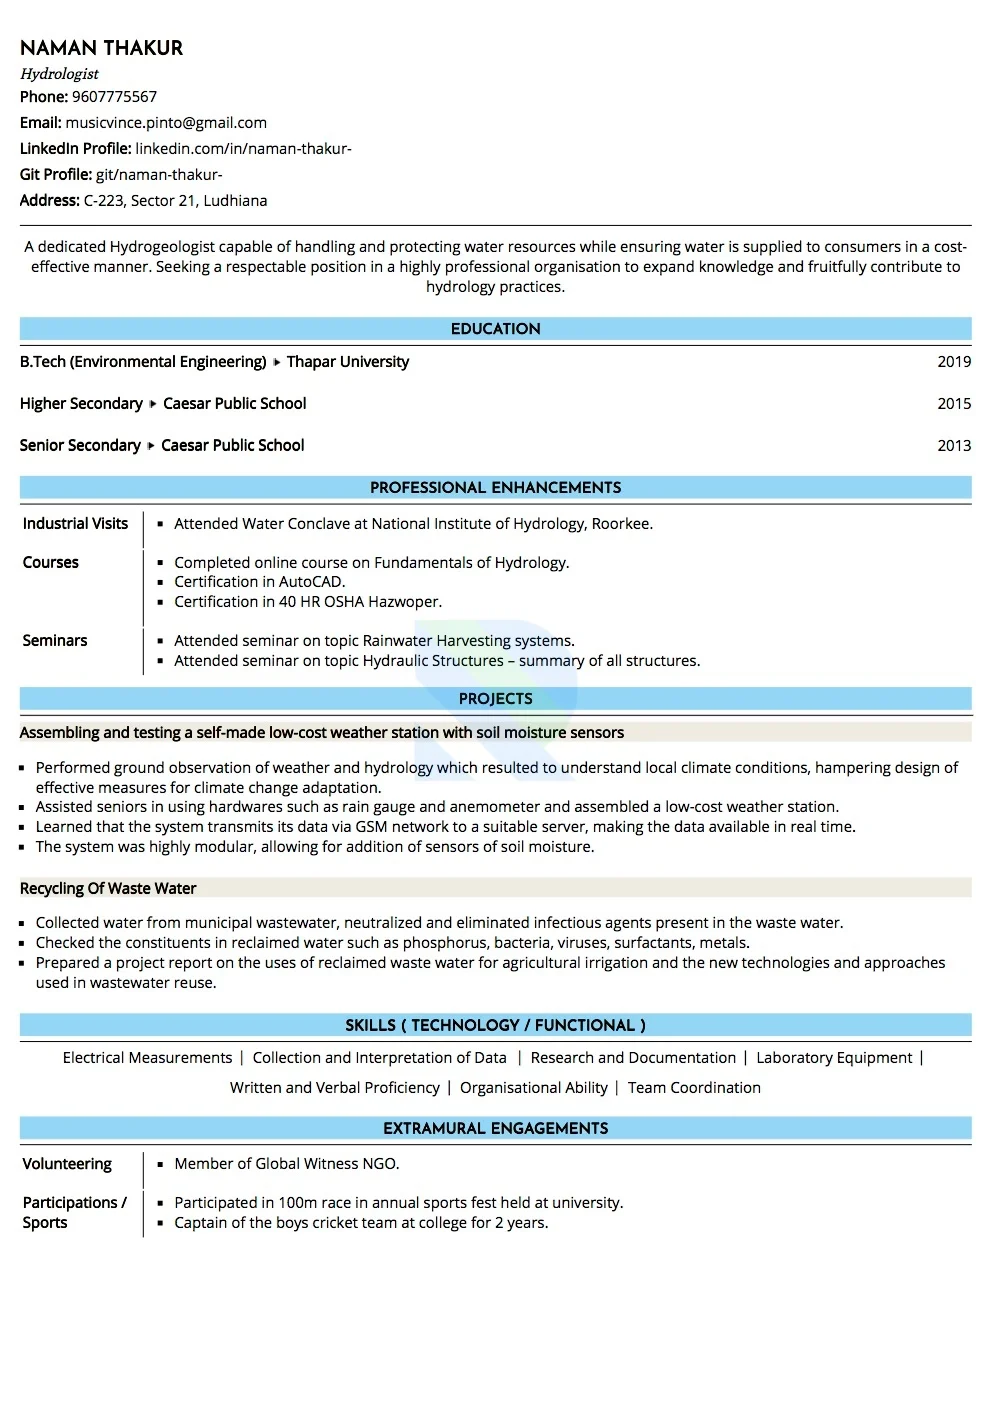 Sample Resume of Hydrologist | Free Resume Templates & Samples on Resumod.co